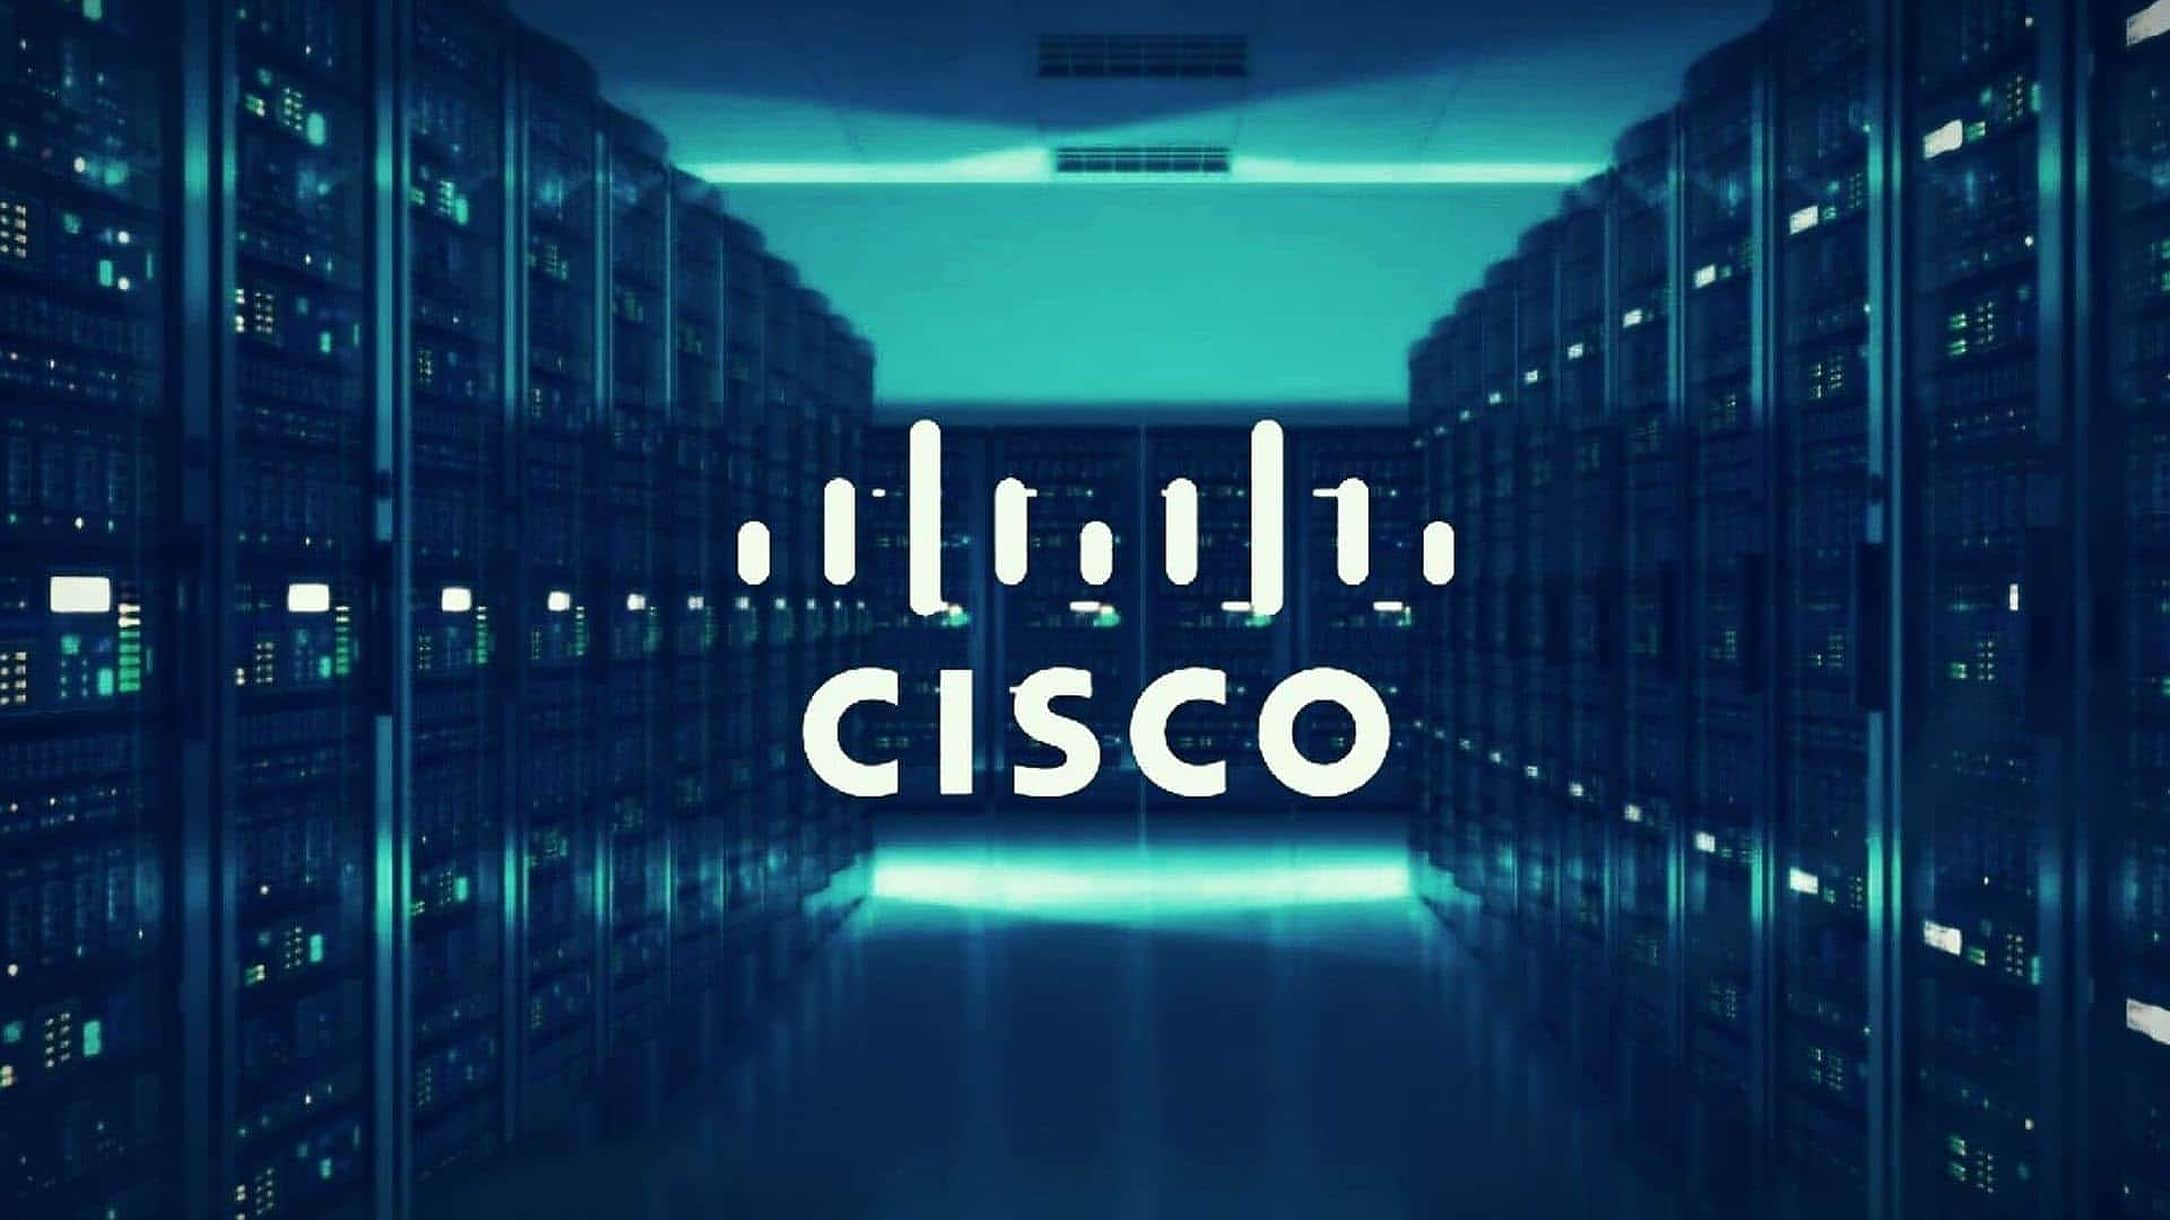 Cisco introduces AI supercomputer network chips